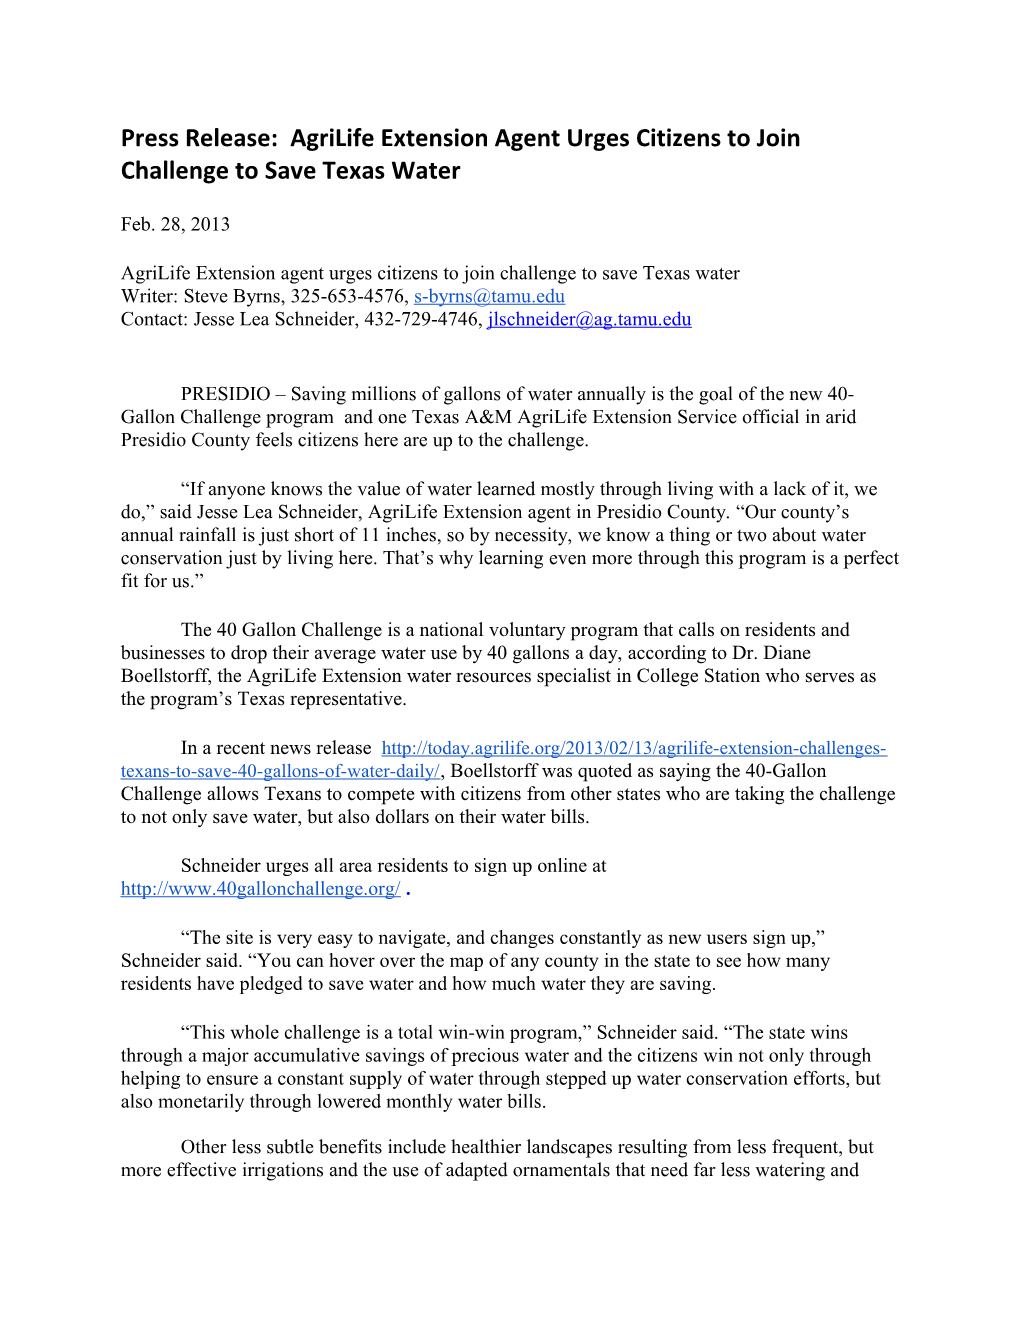 Press Release: Agrilife Extension Agent Urges Citizens to Join Challenge to Save Texas Water